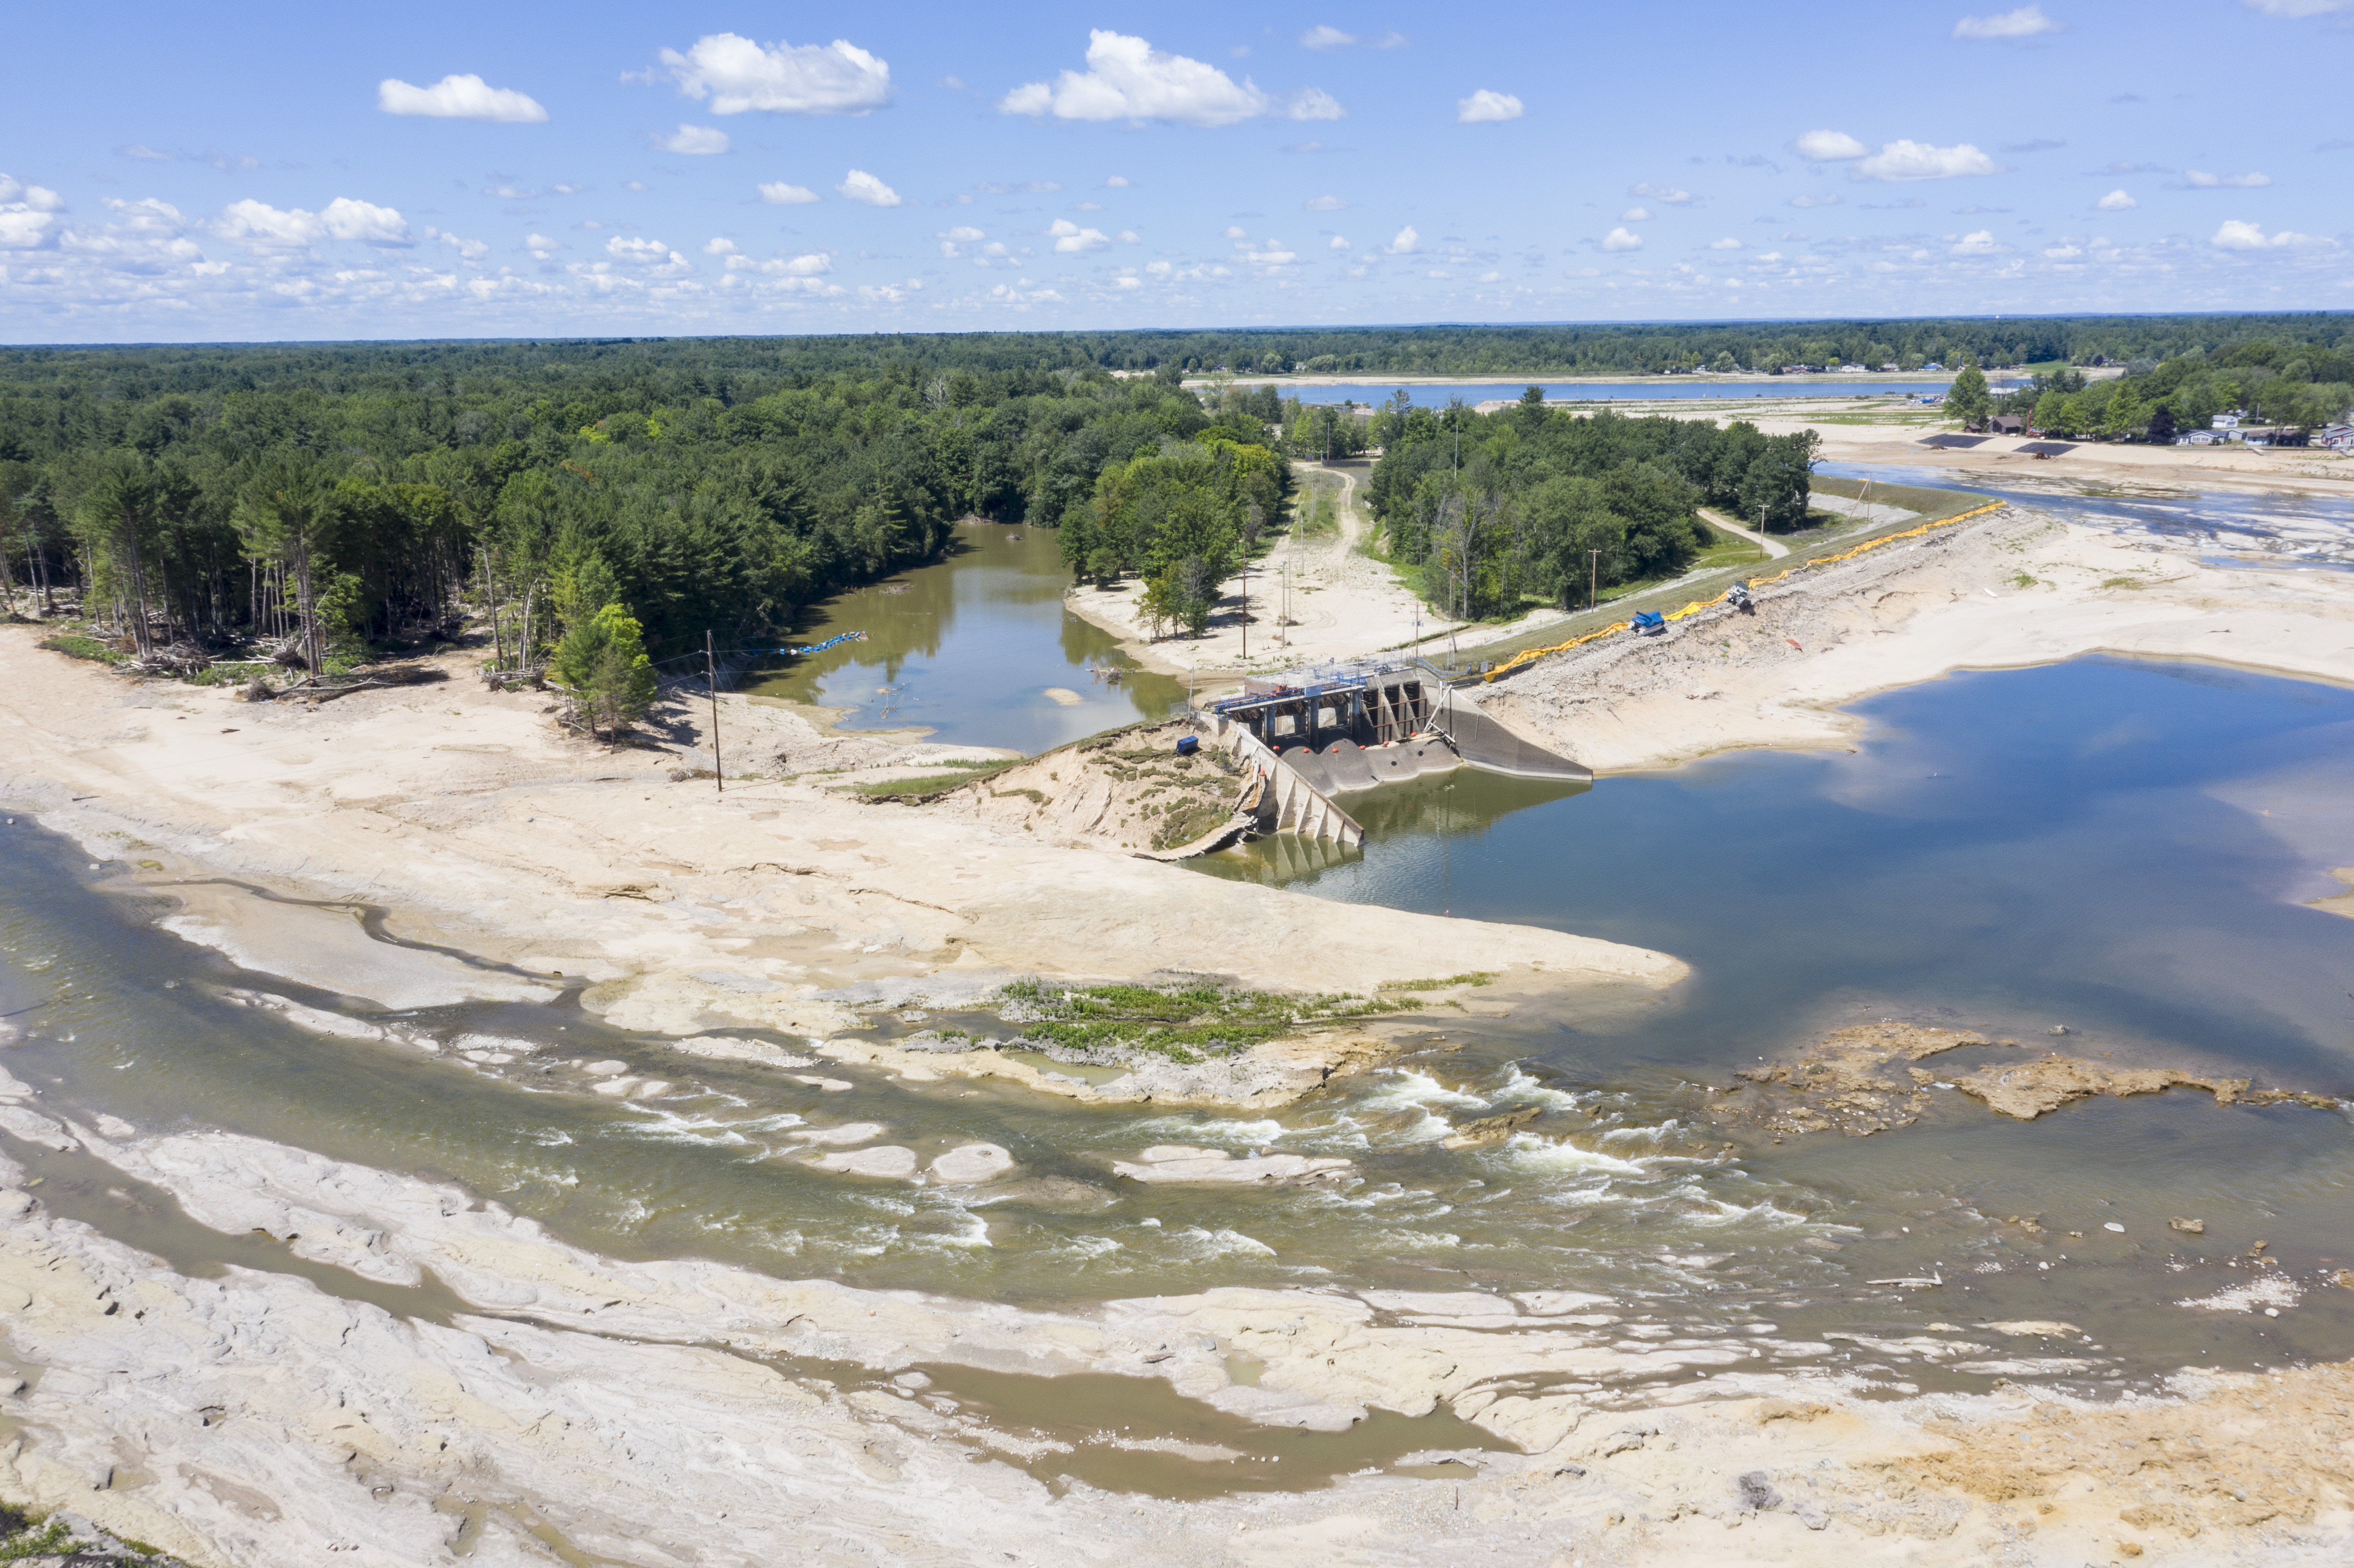 A view of the Edenville Dam in Hope on Thursday, July 30, 2020. The devastating flood in May gushed over the majority of land in this area. (Kaytie Boomer | MLive.com)